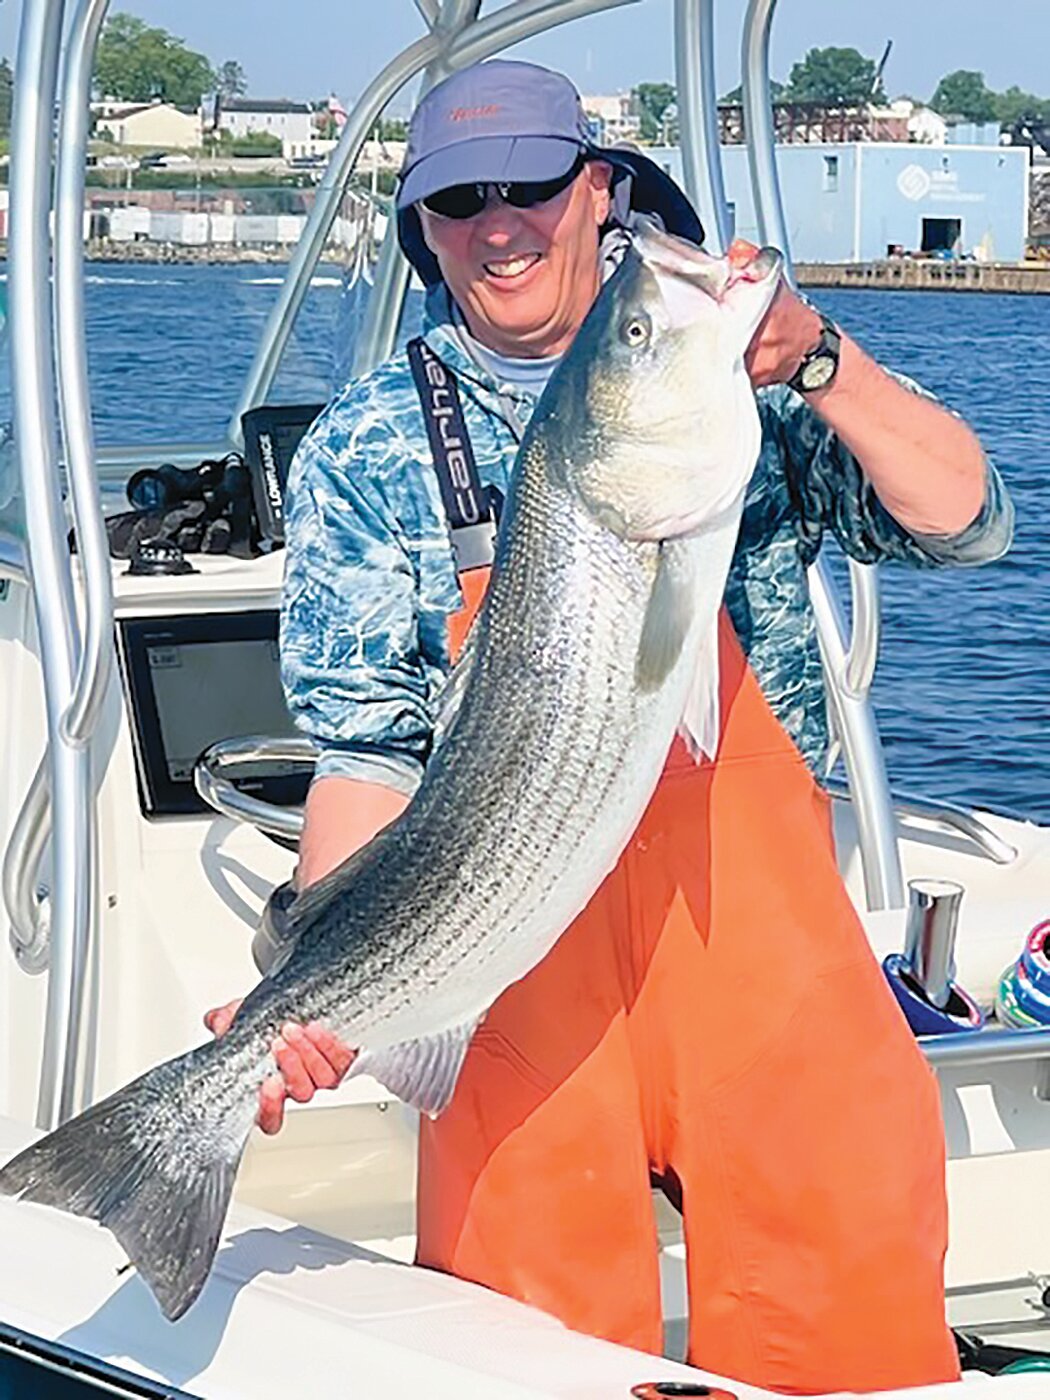 Mike Swain of Coventry, an expert large striped bass angler, caught and released this 30-pound striper last weekend in the upper Providence River, using a live Atlantic menhaden (pogie) as bait.